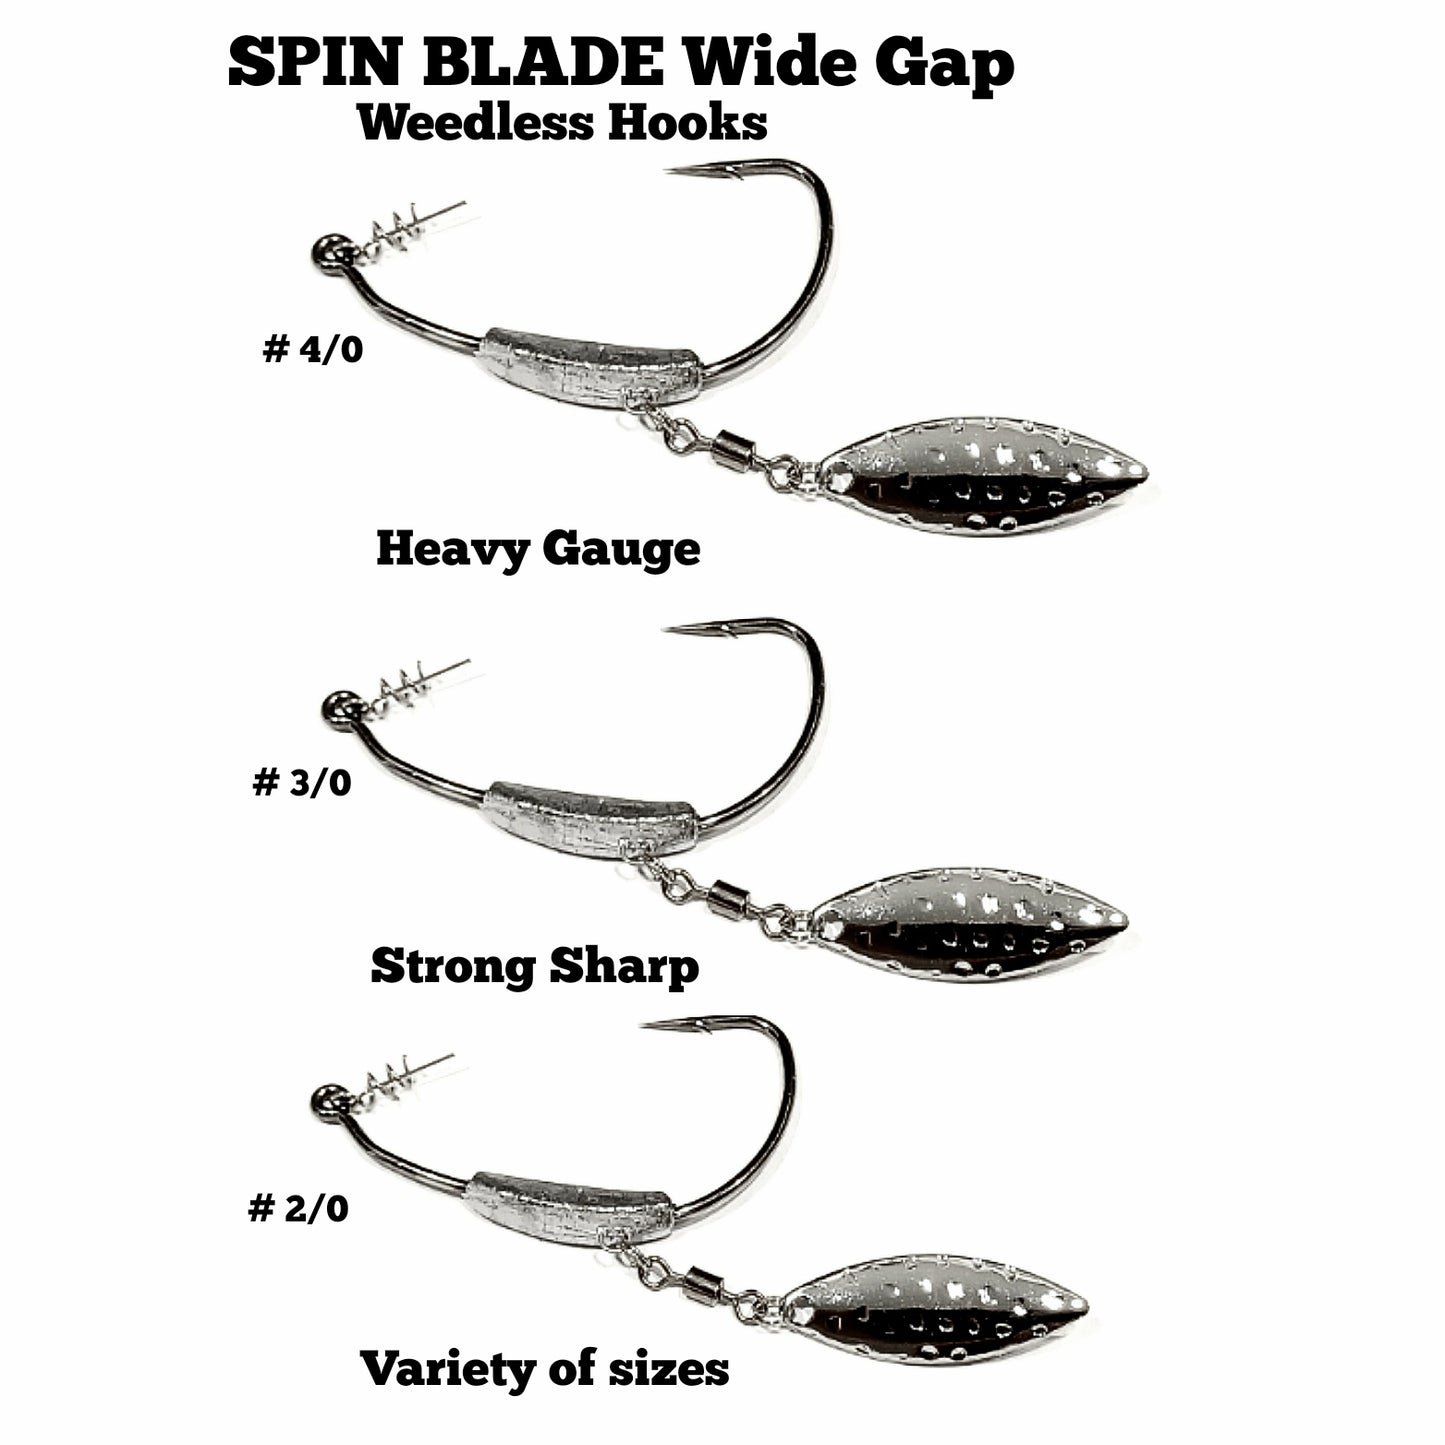 Wide Gap SPIN BLADE weedless heavy gauge weighted hooks with spring lock bait keeper (Bass Fishing -Swimbaits-Creature Baits-Grubs)